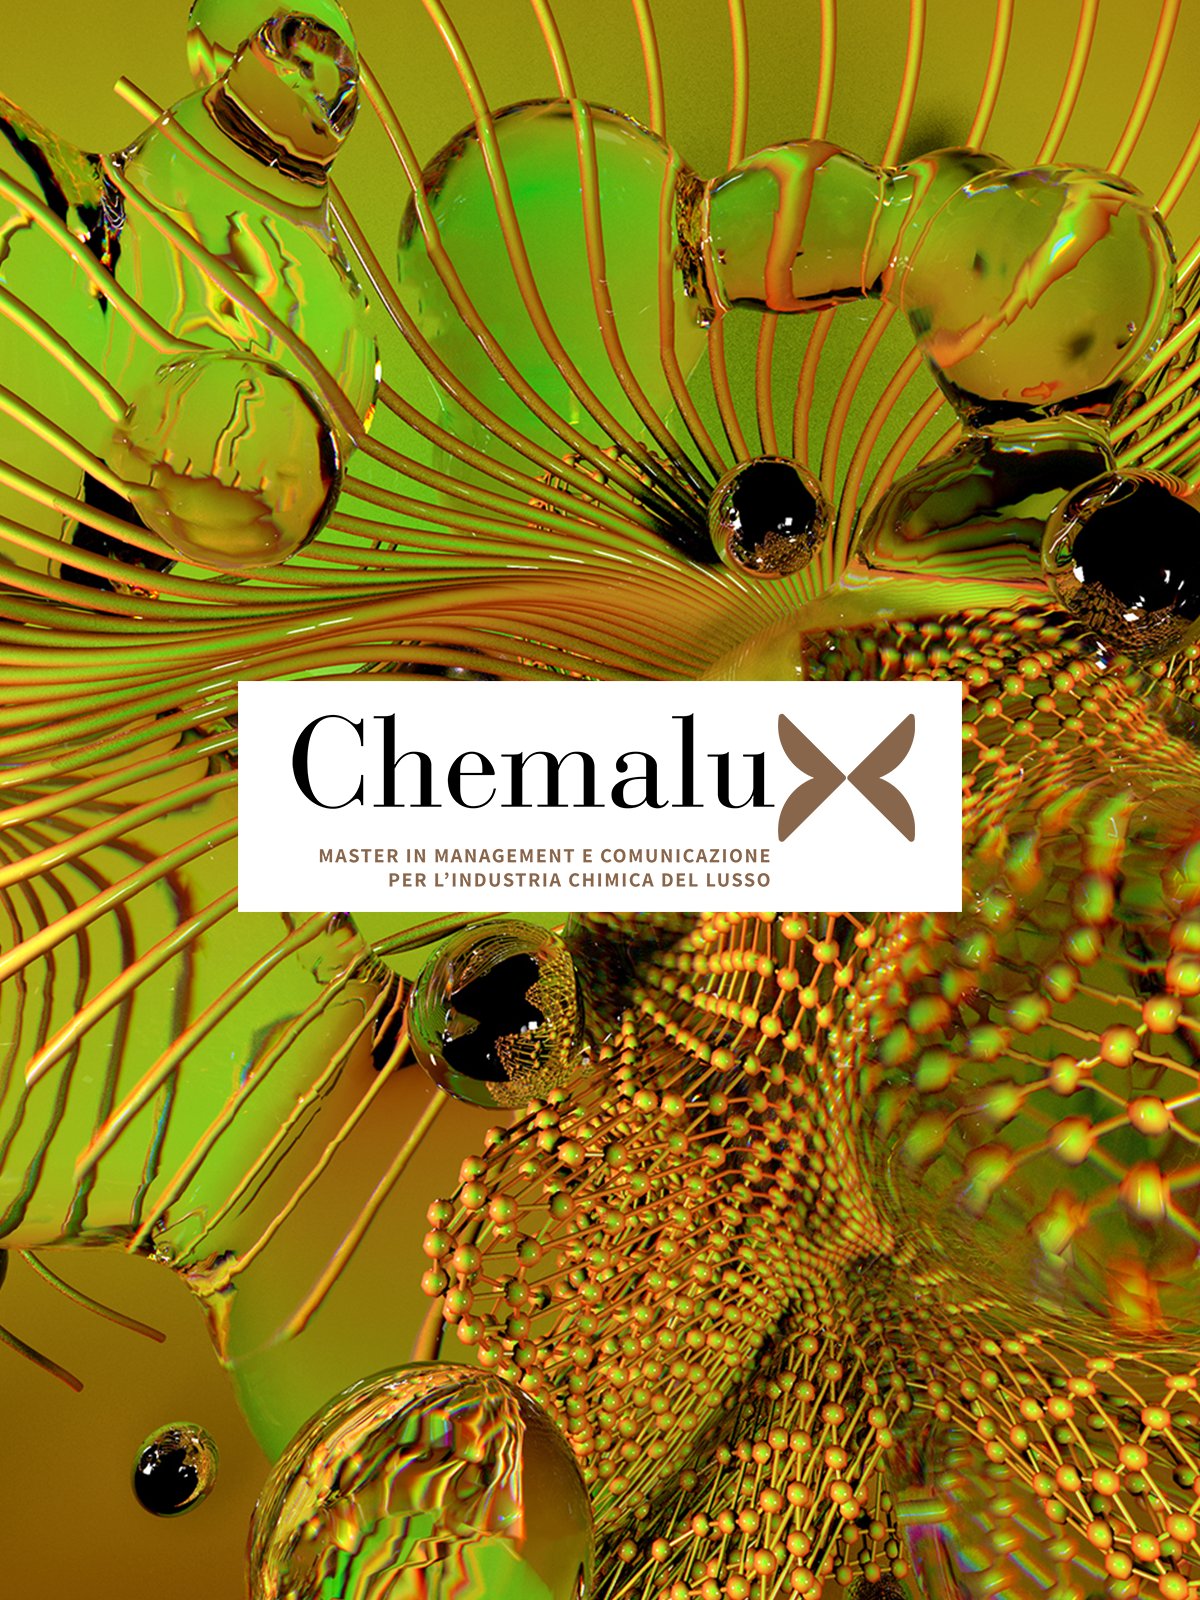 CHEMALUX: This is how new managers of Luxury are born